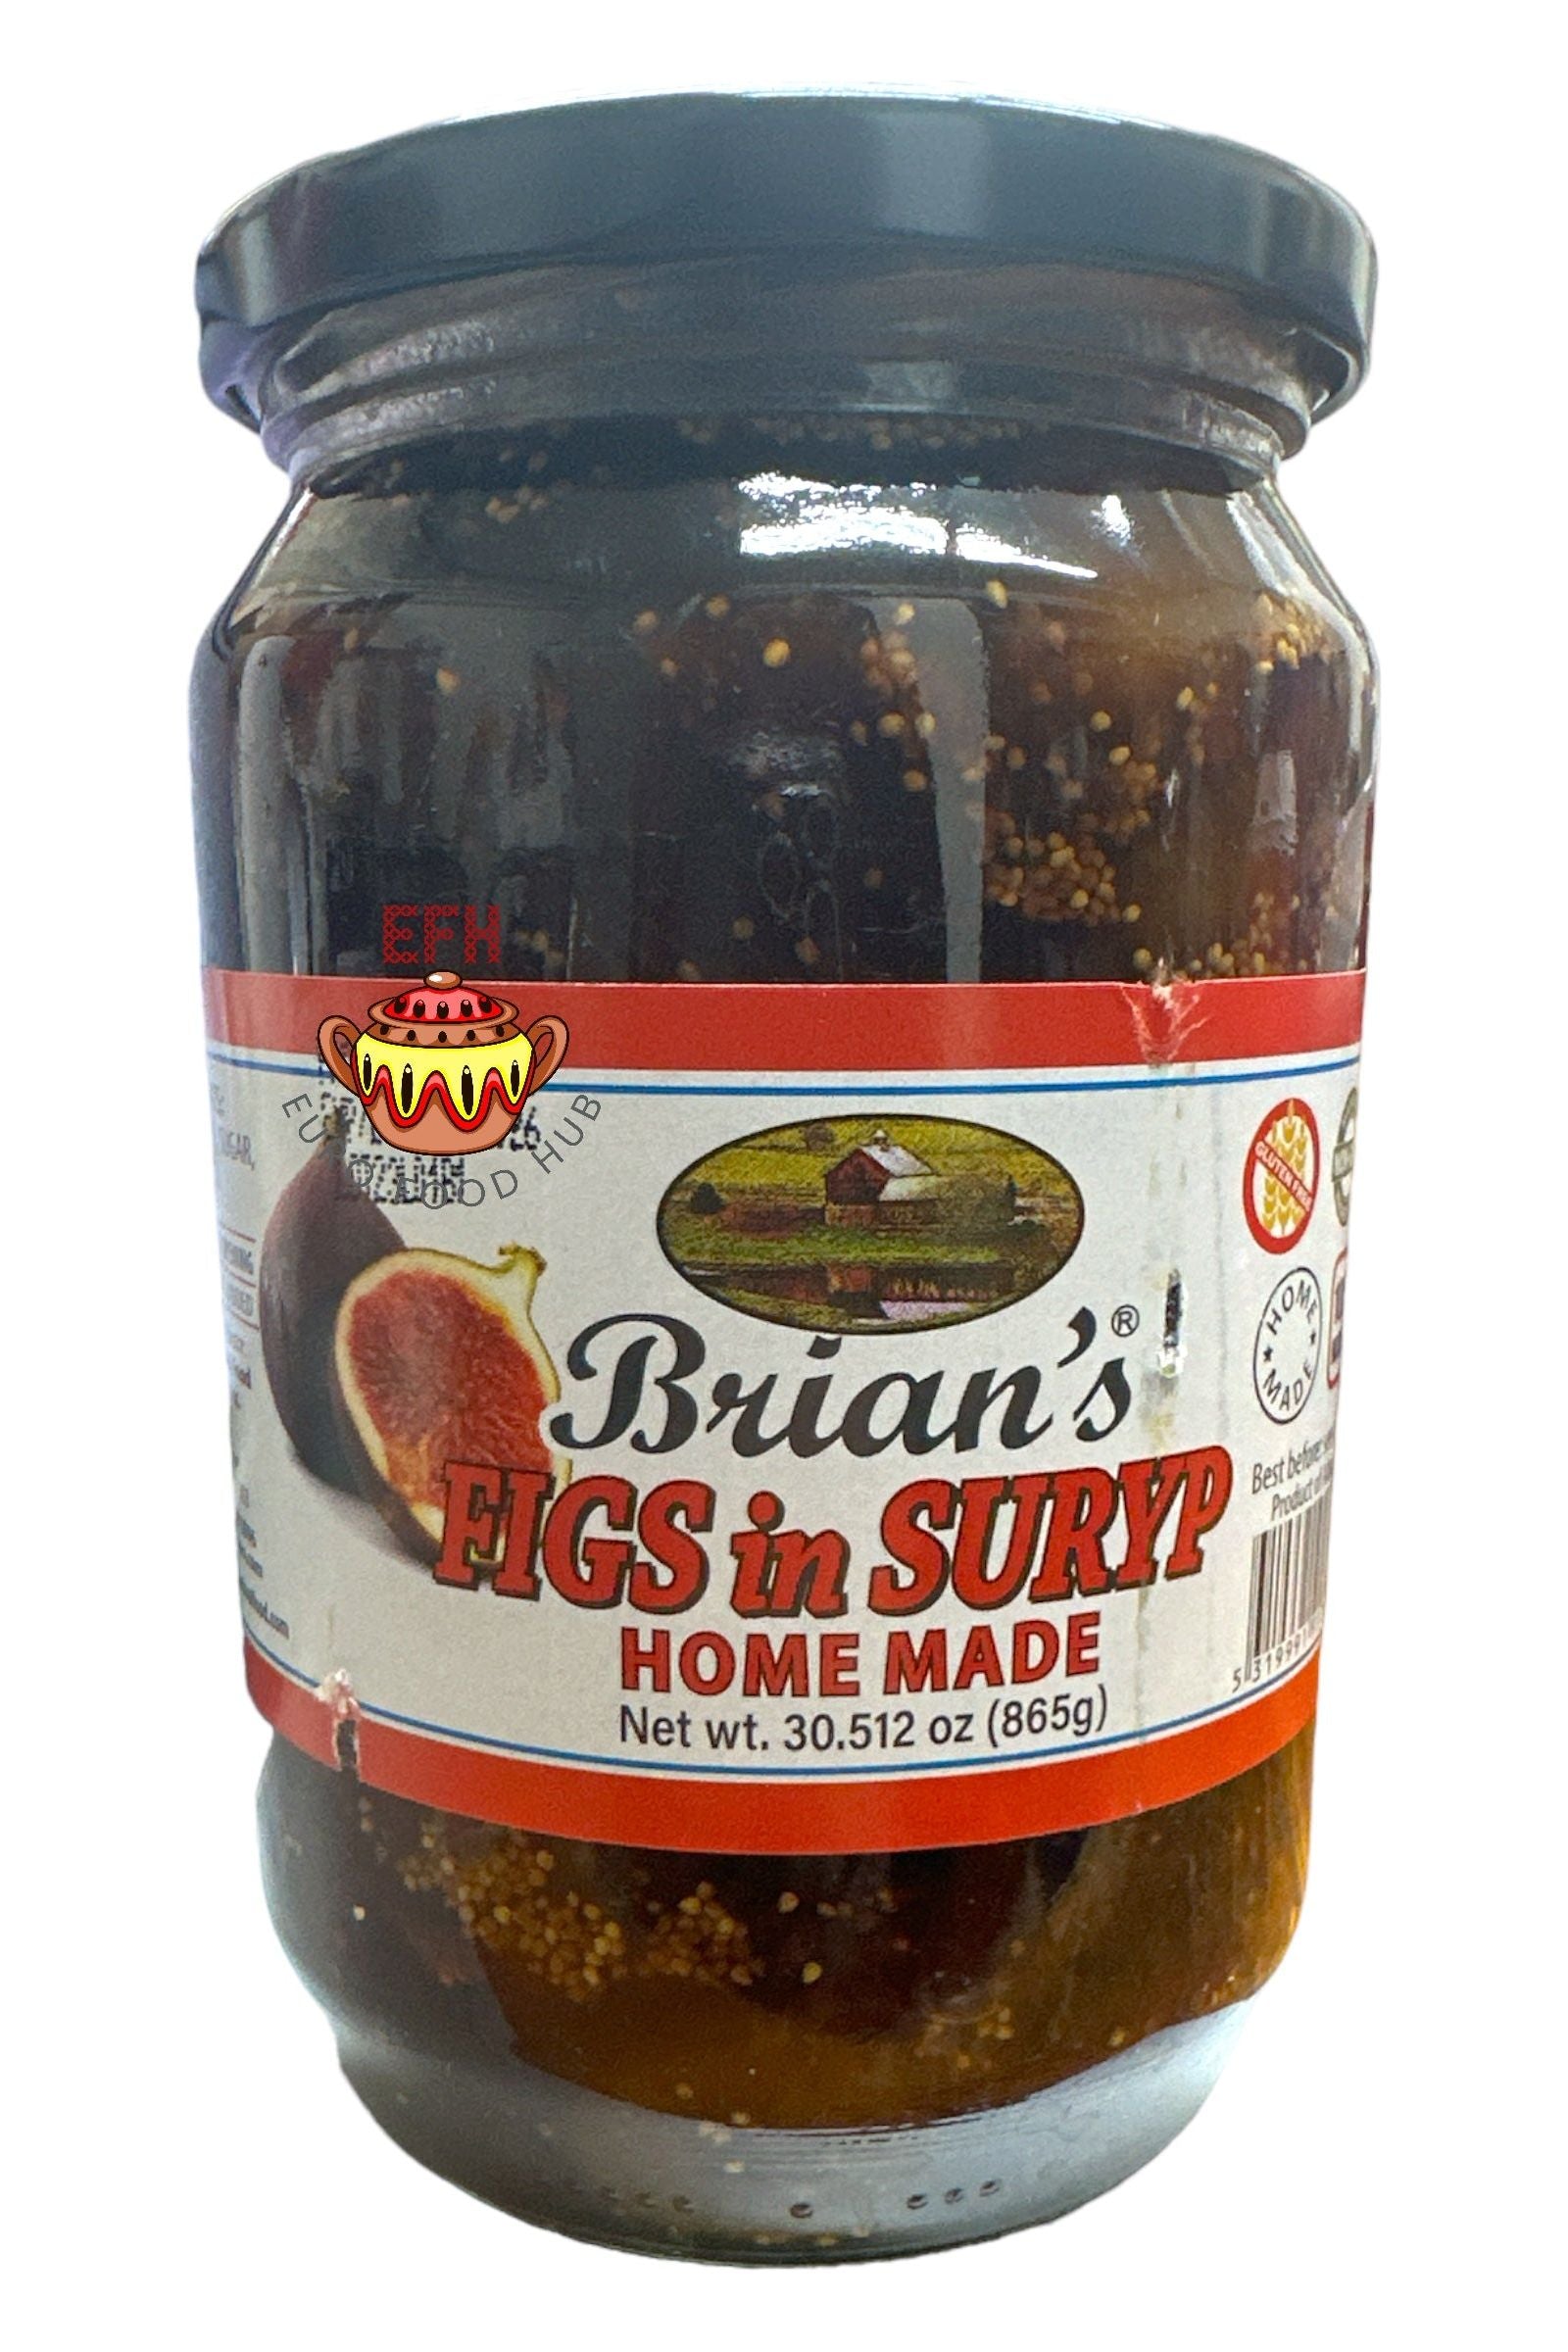 Brian's European Natural Products - FIGS in Syrup - 865g